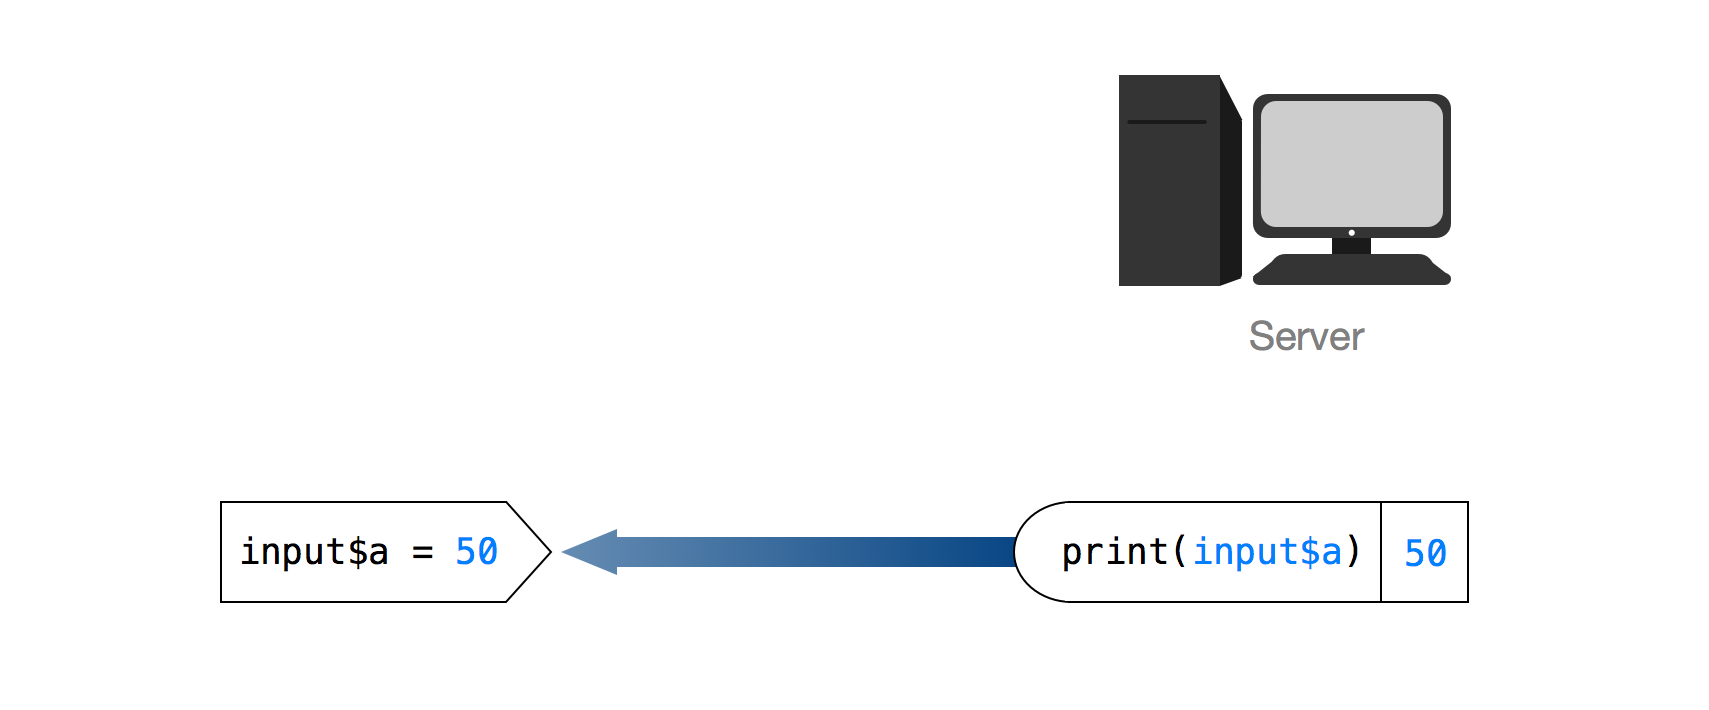 Input value input$a = 50. Output value print(input$a) 50 next to image of a server. Arrow goes from output to input.